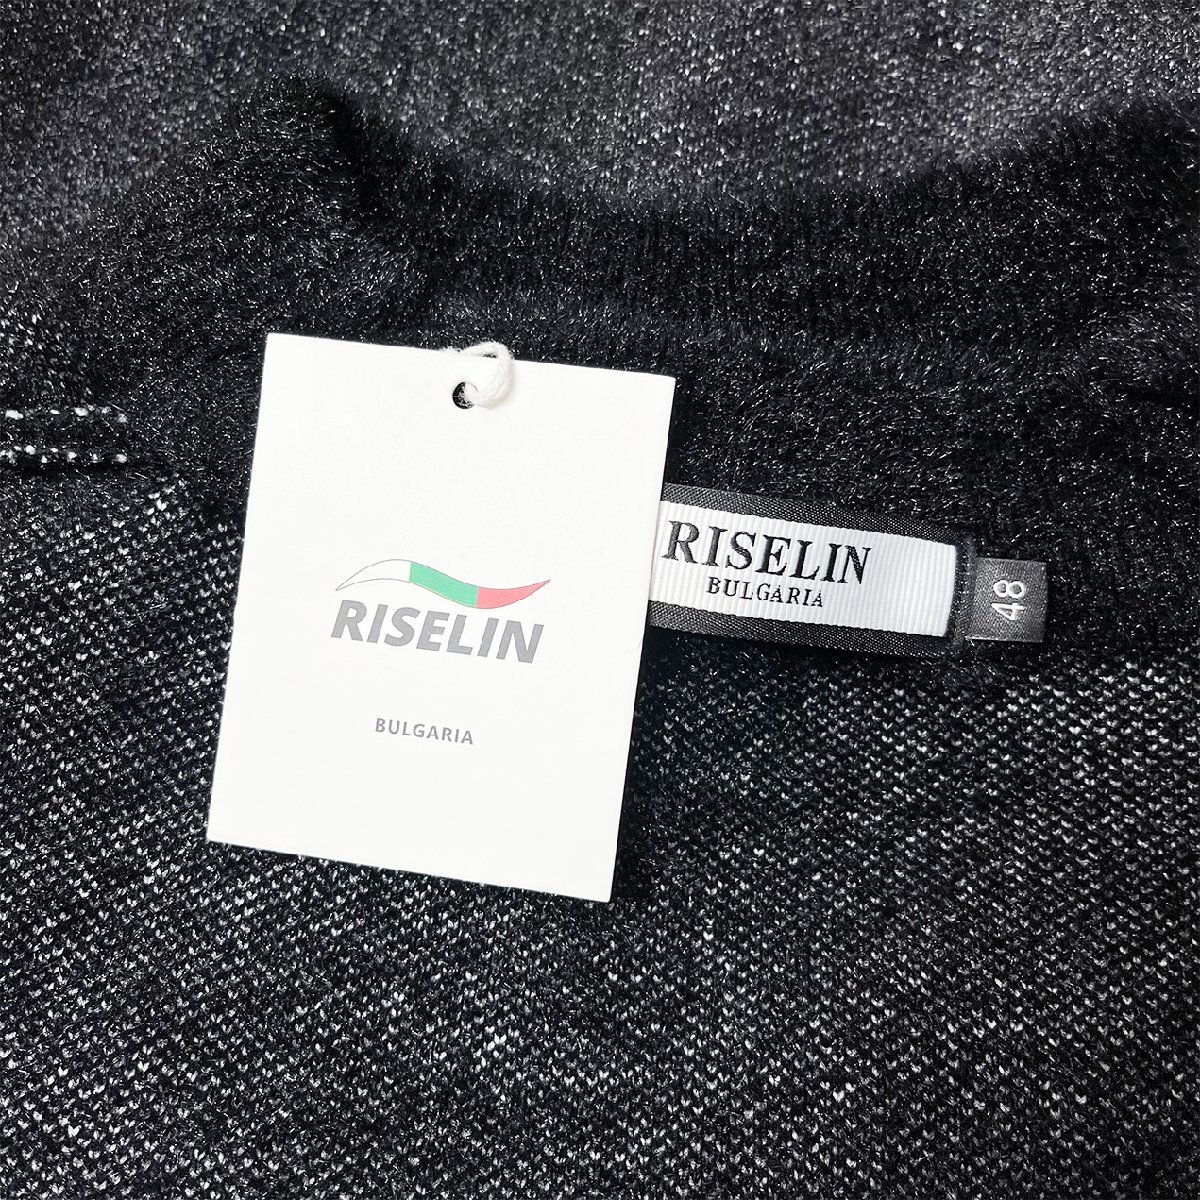  highest peak Europe made * regular price 5 ten thousand * BVLGARY a departure *RISELIN sweater cashmere / mink . ound-necked protection against cold nappy dressing up relax comfortable everyday L/48